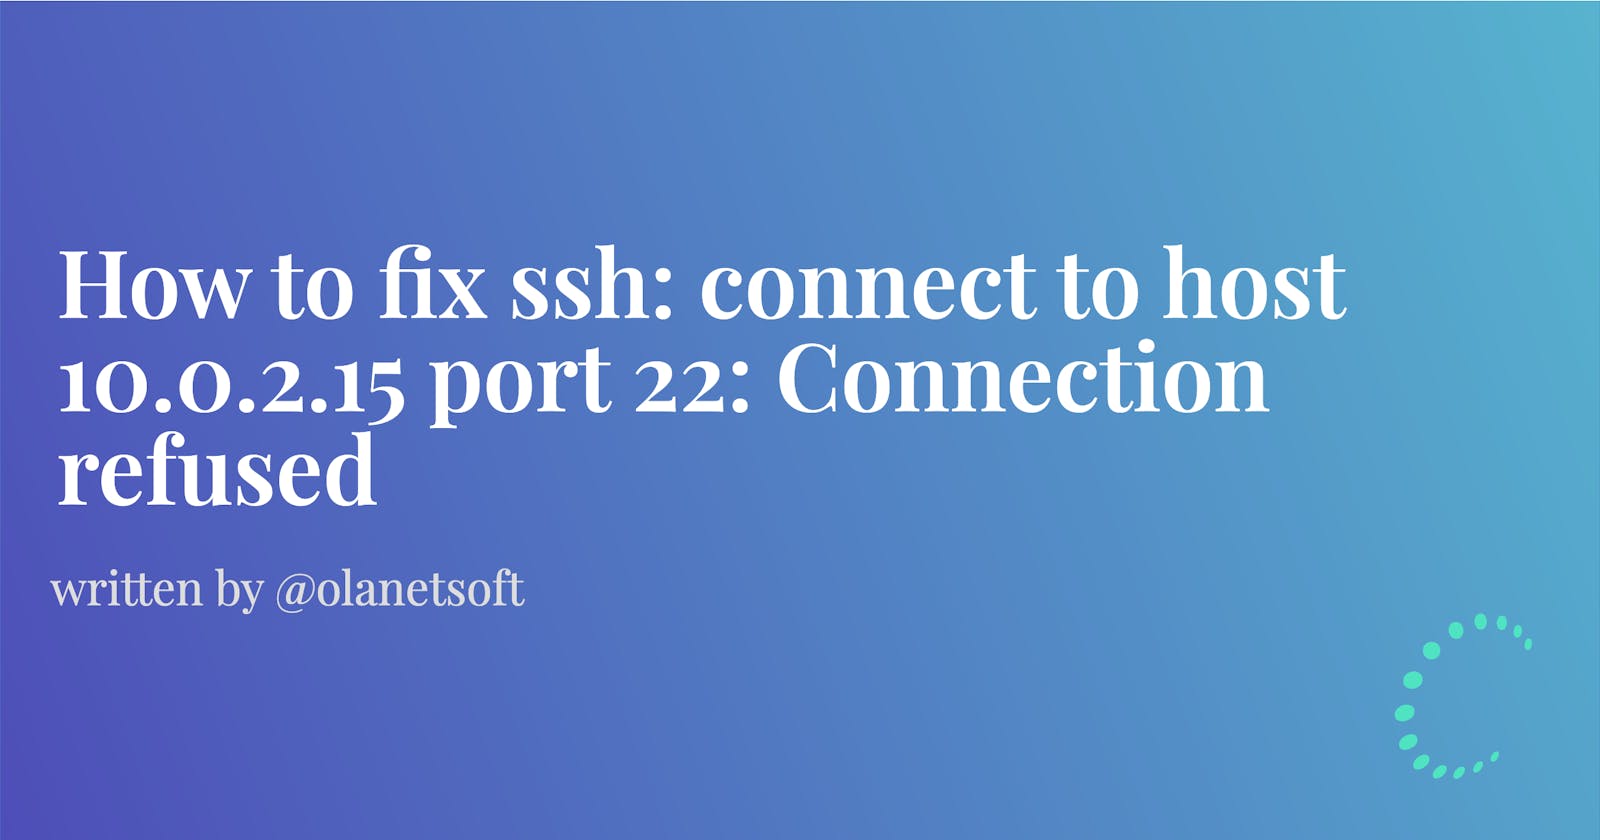 How to fix ssh: connect to host 10.0.2.15 port 22: Connection refused